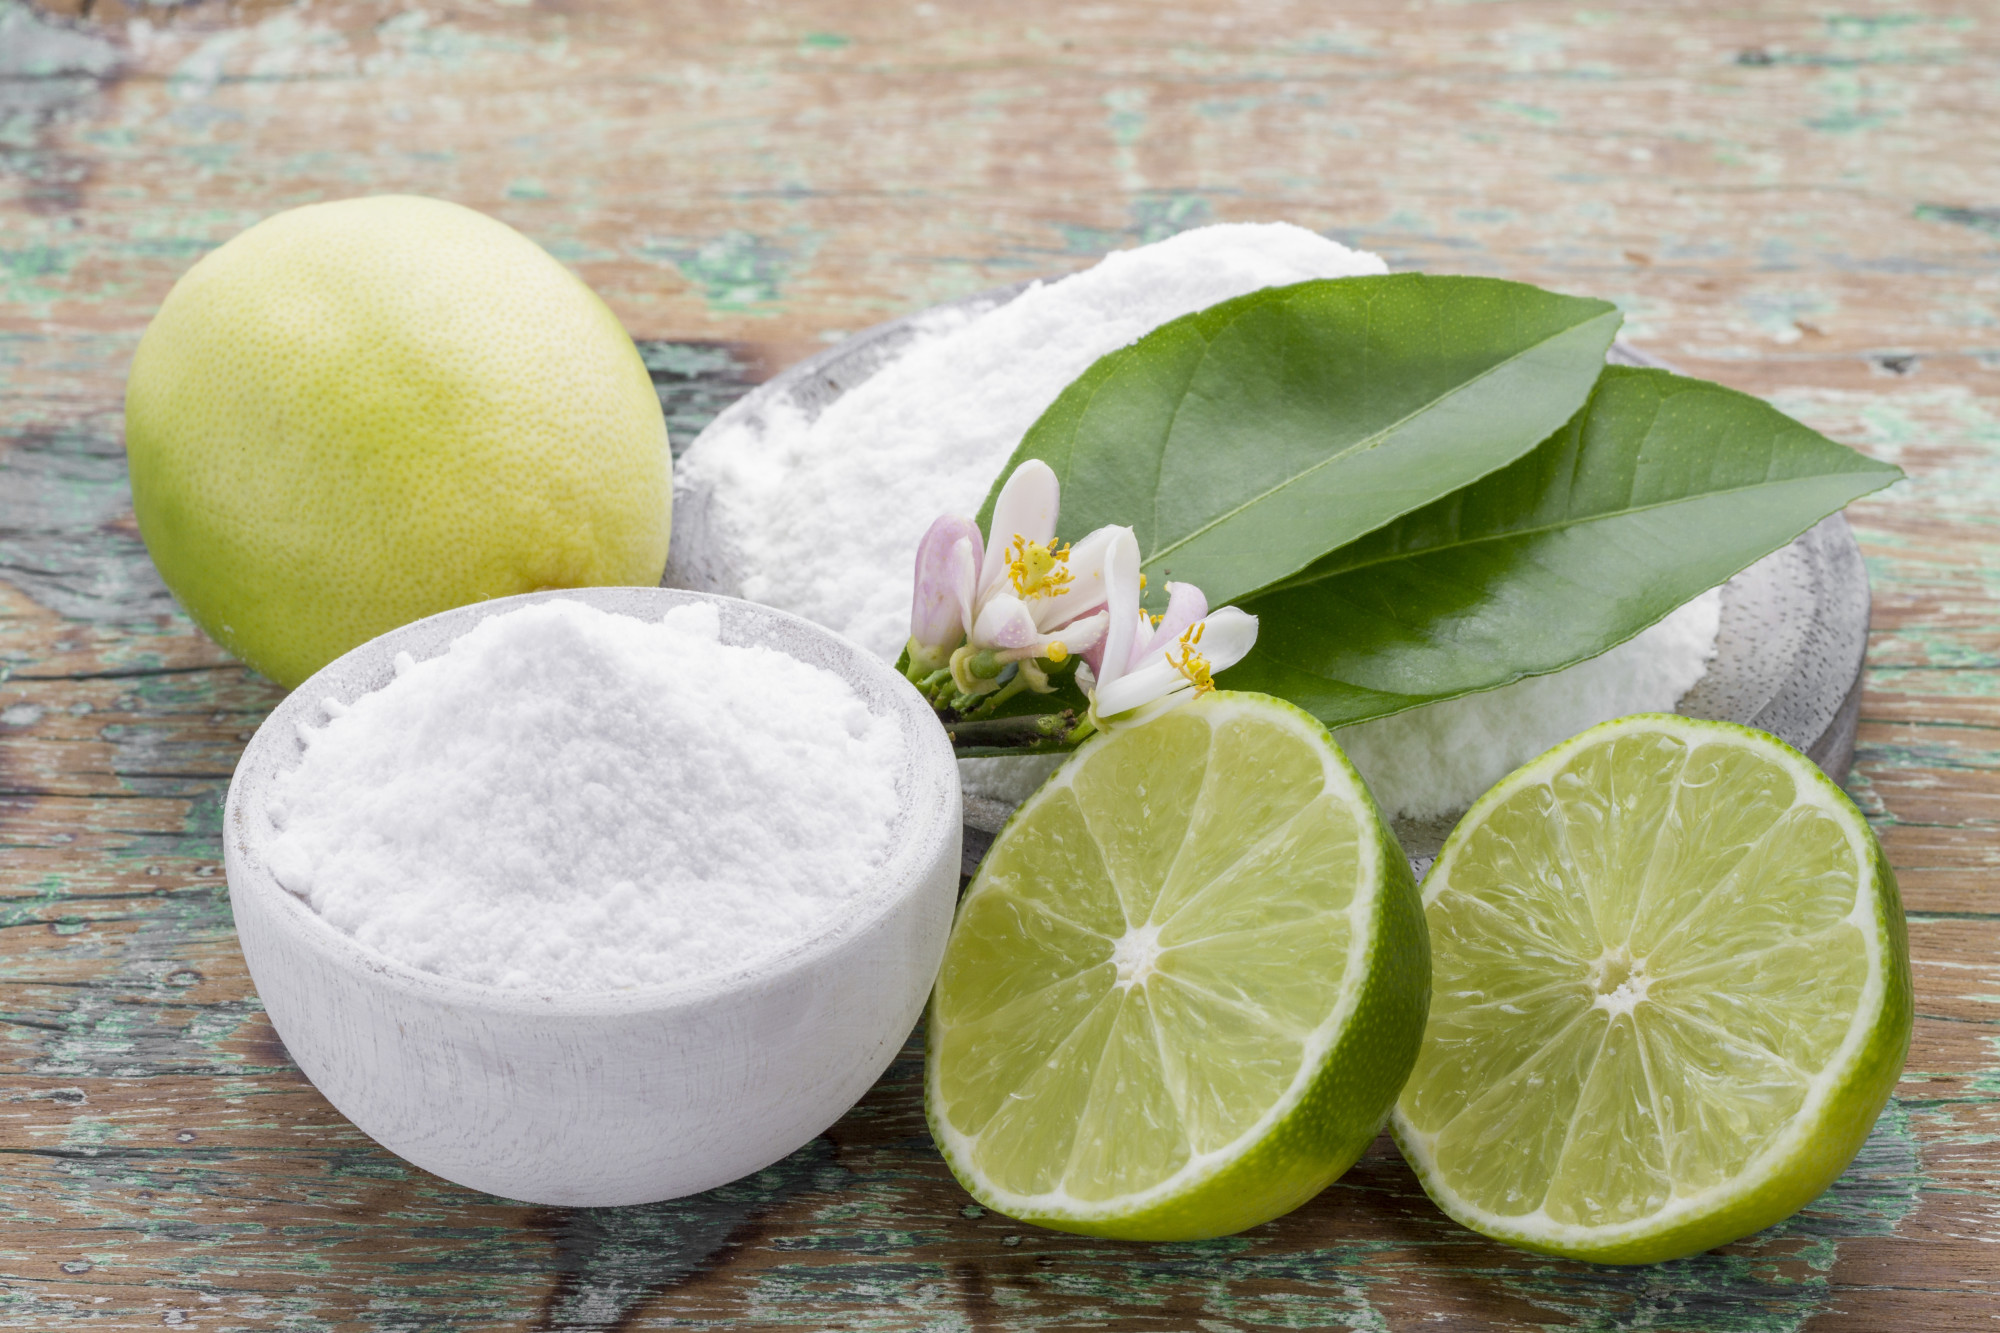 making your own citric acid cleaner